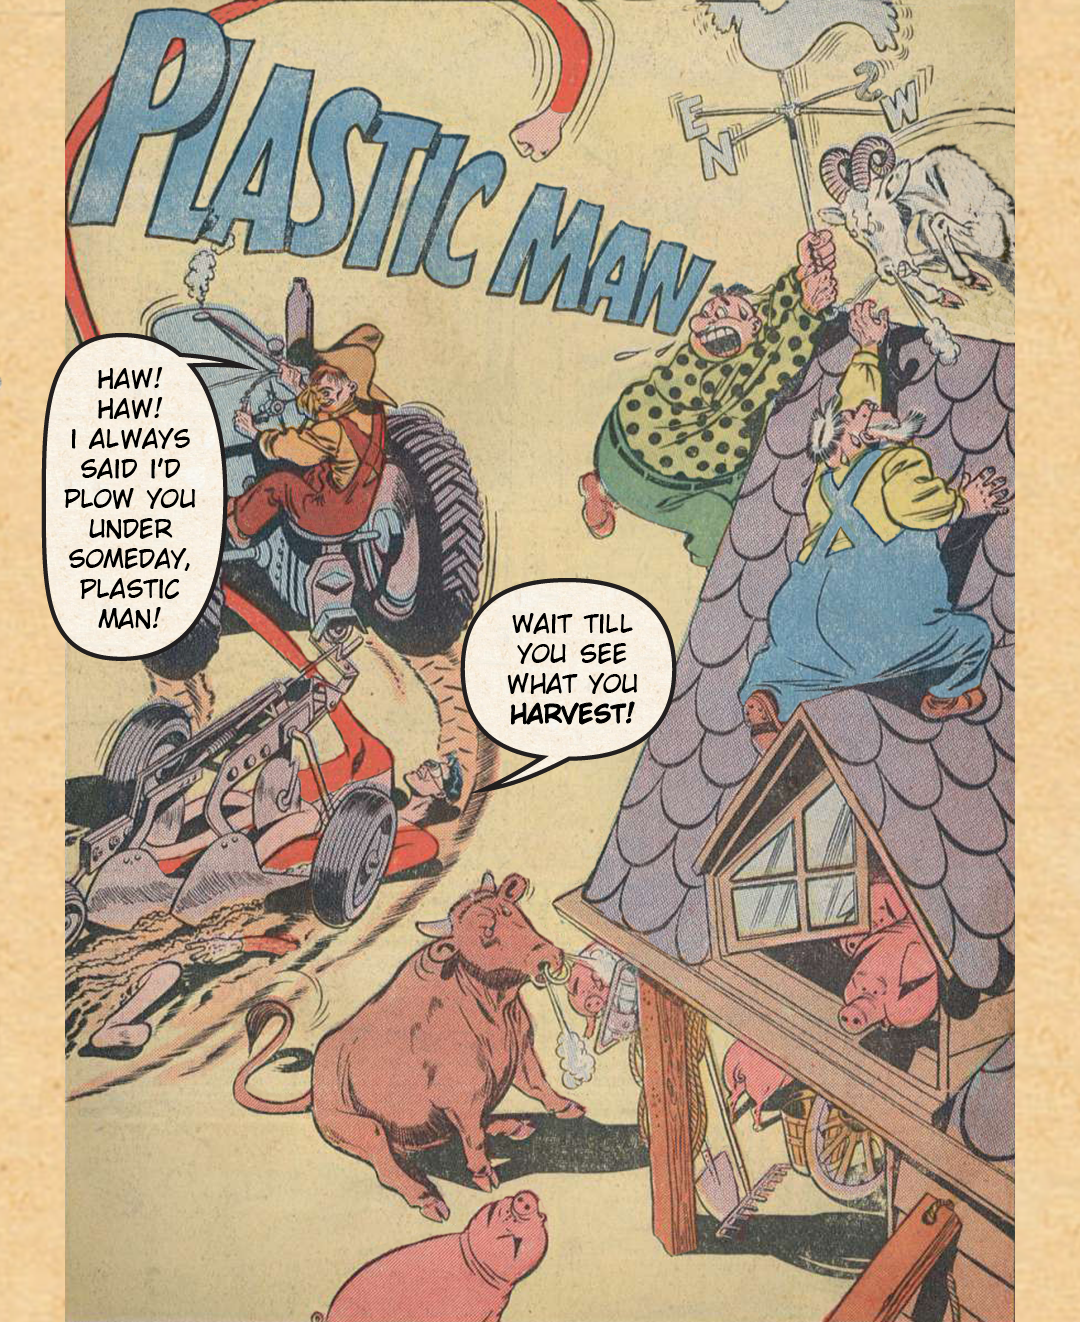 Plastic Man at the Farm #1 - Making Money image number 2